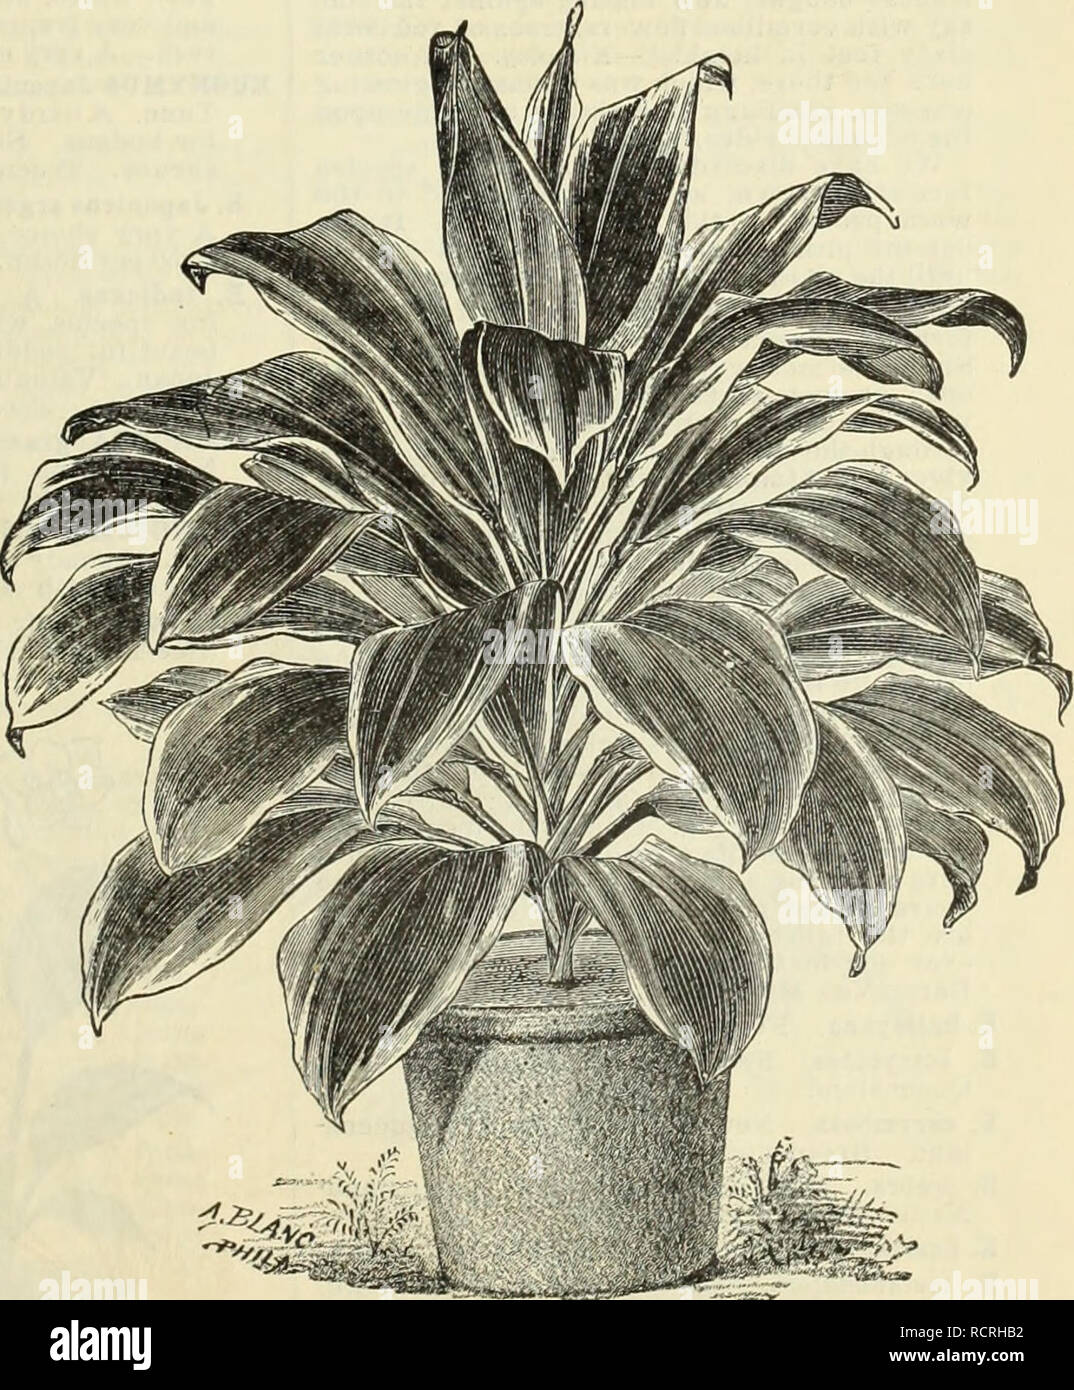 . Descriptive and illustrated catalogue and manual / Royal Palm Nurseries. Nurseries (Horticulture) Florida Catalogs; Tropical plants Catalogs; Fruit trees Seedlings Catalogs; Citrus fruit industry Catalogs; Fruit Catalogs; Plants, Ornamental Catalogs. Miscellaneous Department. 73 CYETANTHTJS obliquus. An Amaryllis-like plant from South Africa, with drooping flowers, produced in bunches of ten or fifteen each; three inches in diameter and bright red, with yellow base. $1 each. DAIS cotinifolia. A small-leaved flowering shrub from South Africa. Perhaps hardy here. 25 cents each. DALBEBGIA Sisso Stock Photo